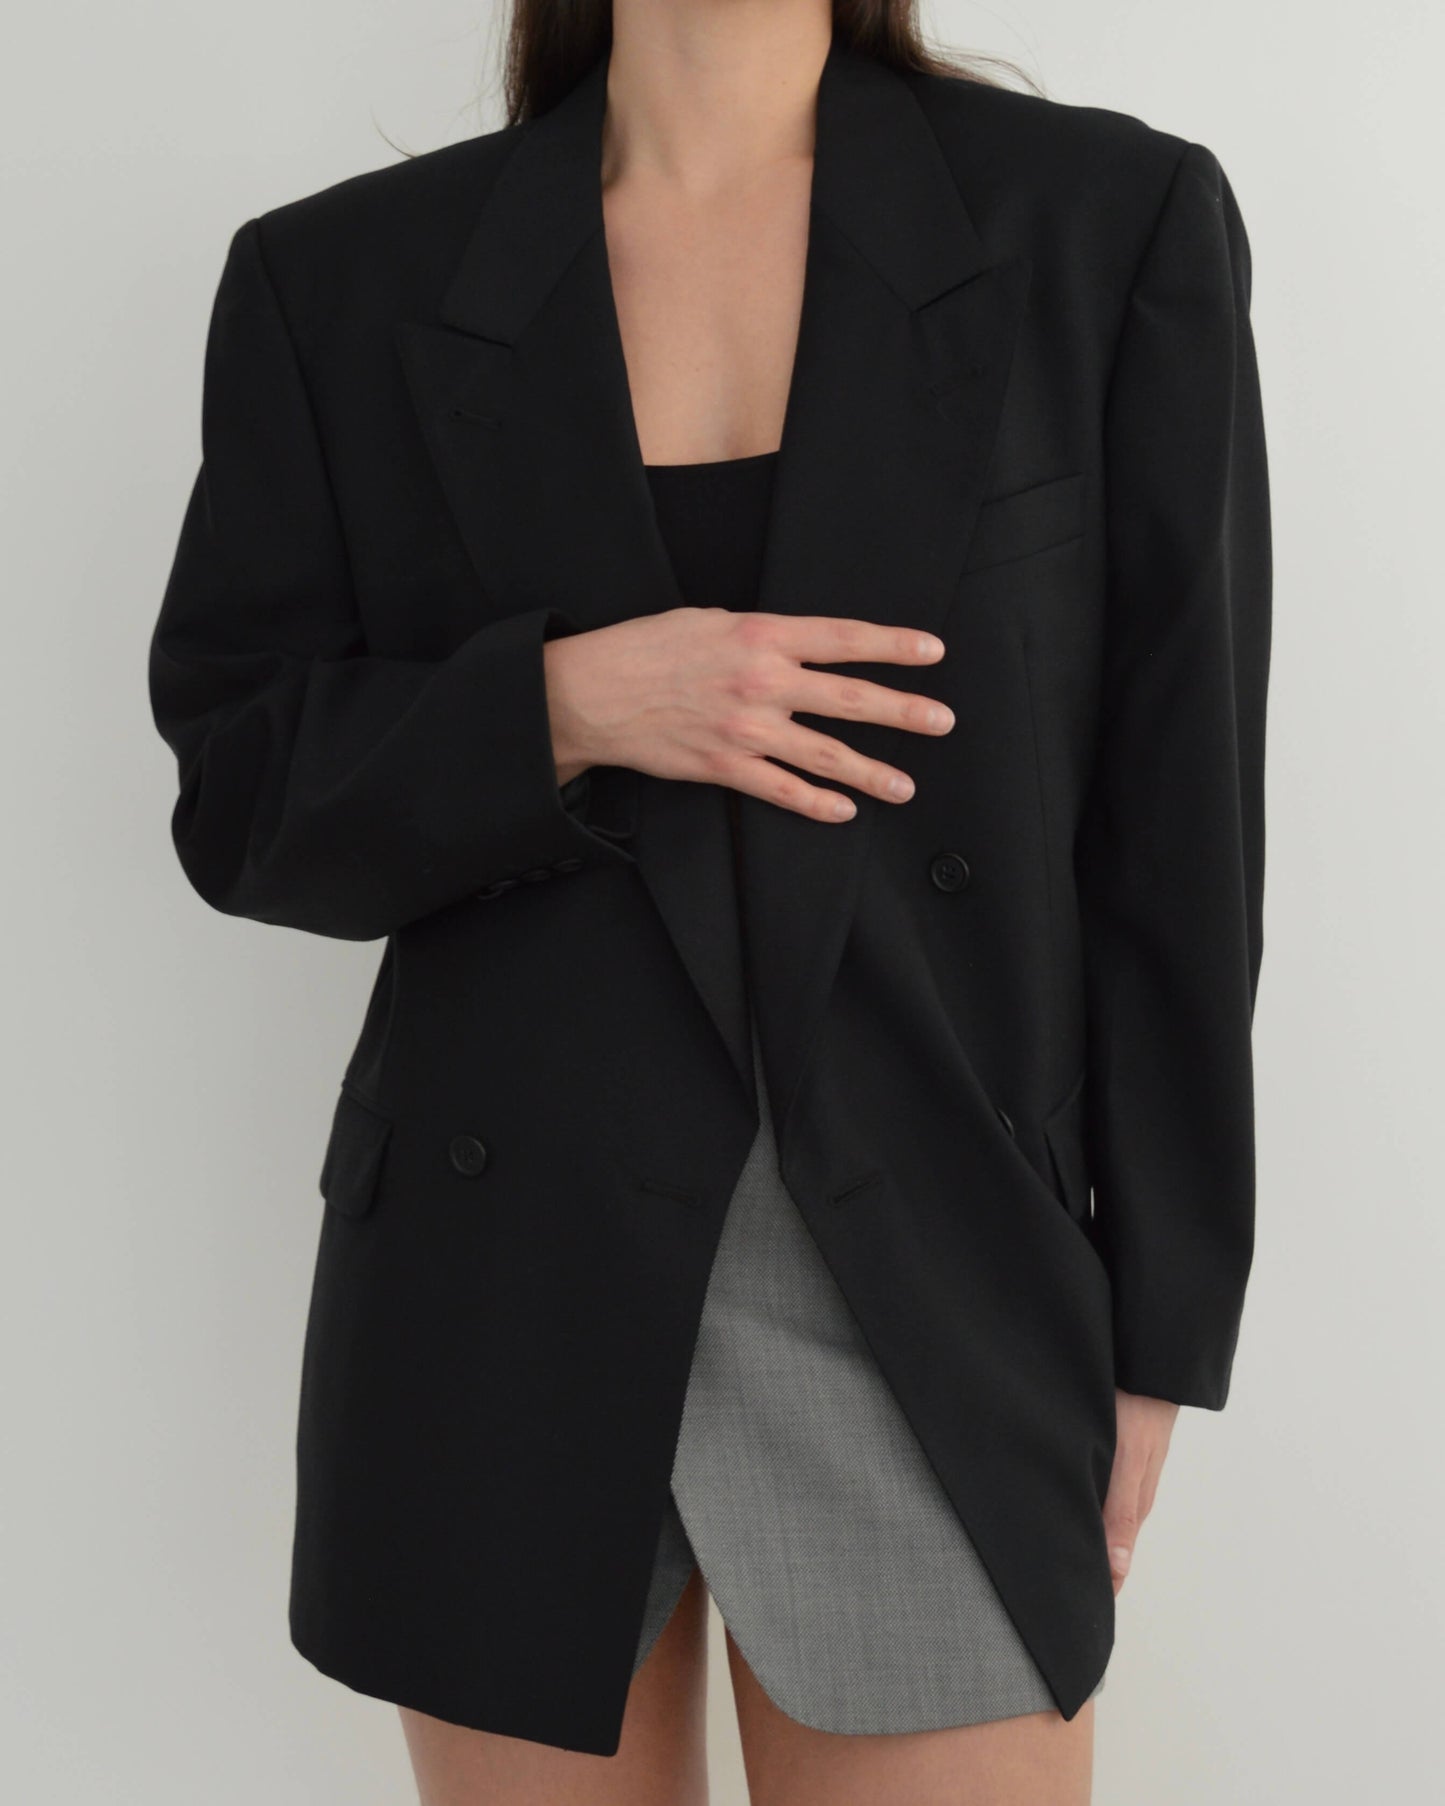 Blazer - Double Breasted Perfect Black (M/XL)